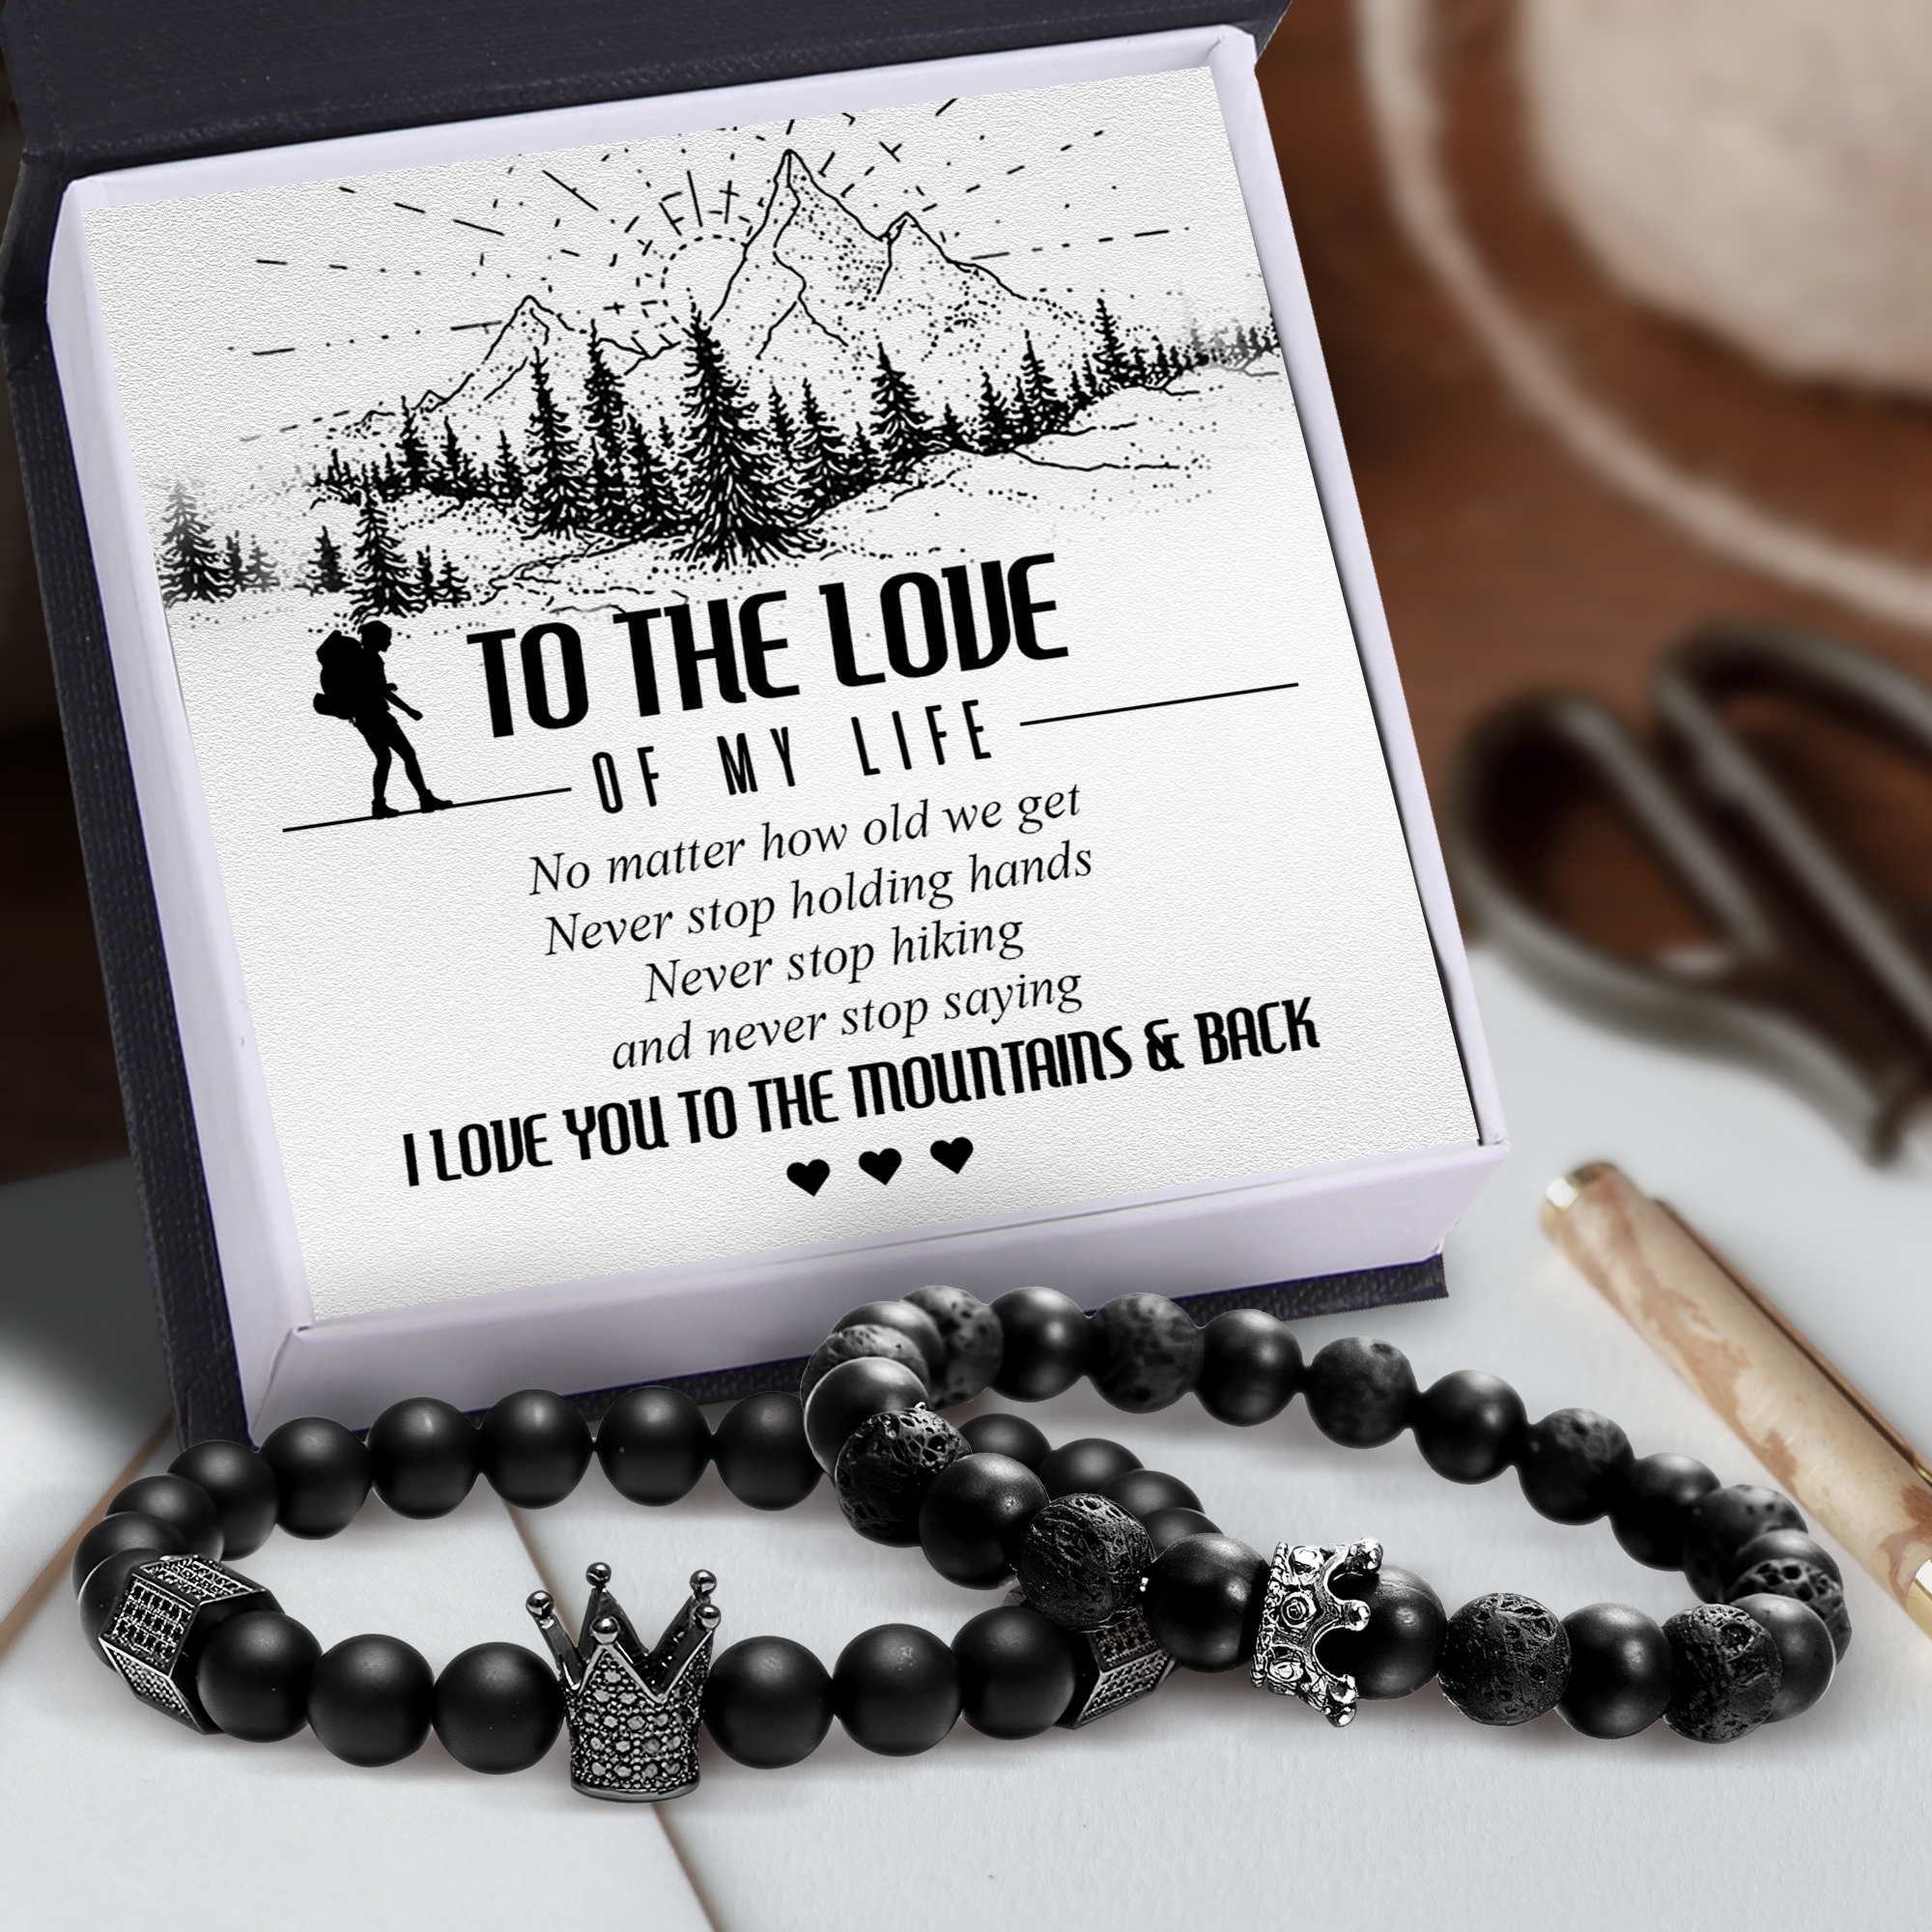 King & Queen Couple Bracelets - Hiking - To The Love Of My Life - I Love You To The Mountains & Back - Ukgbae13008